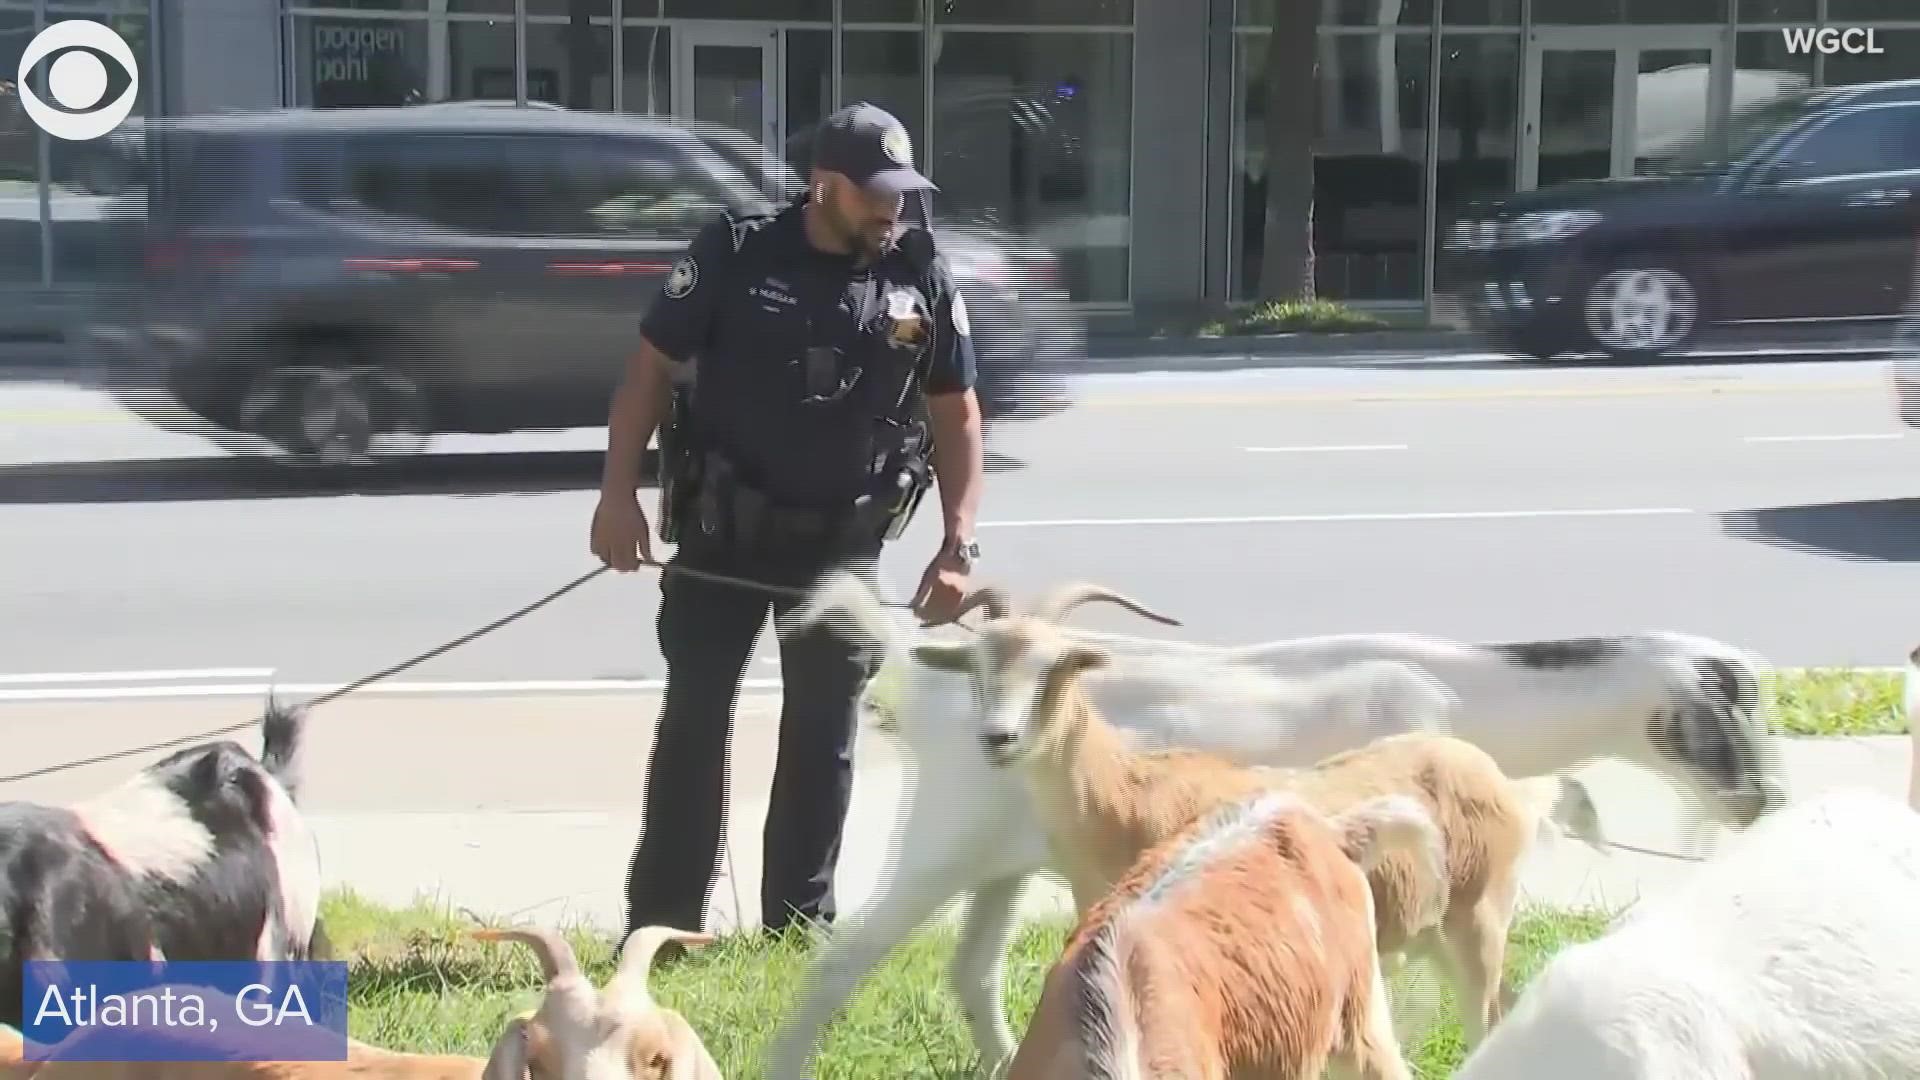 Atlanta police responded to calls about goats on a road in the Buckhead section of the city on Monday (9/27)